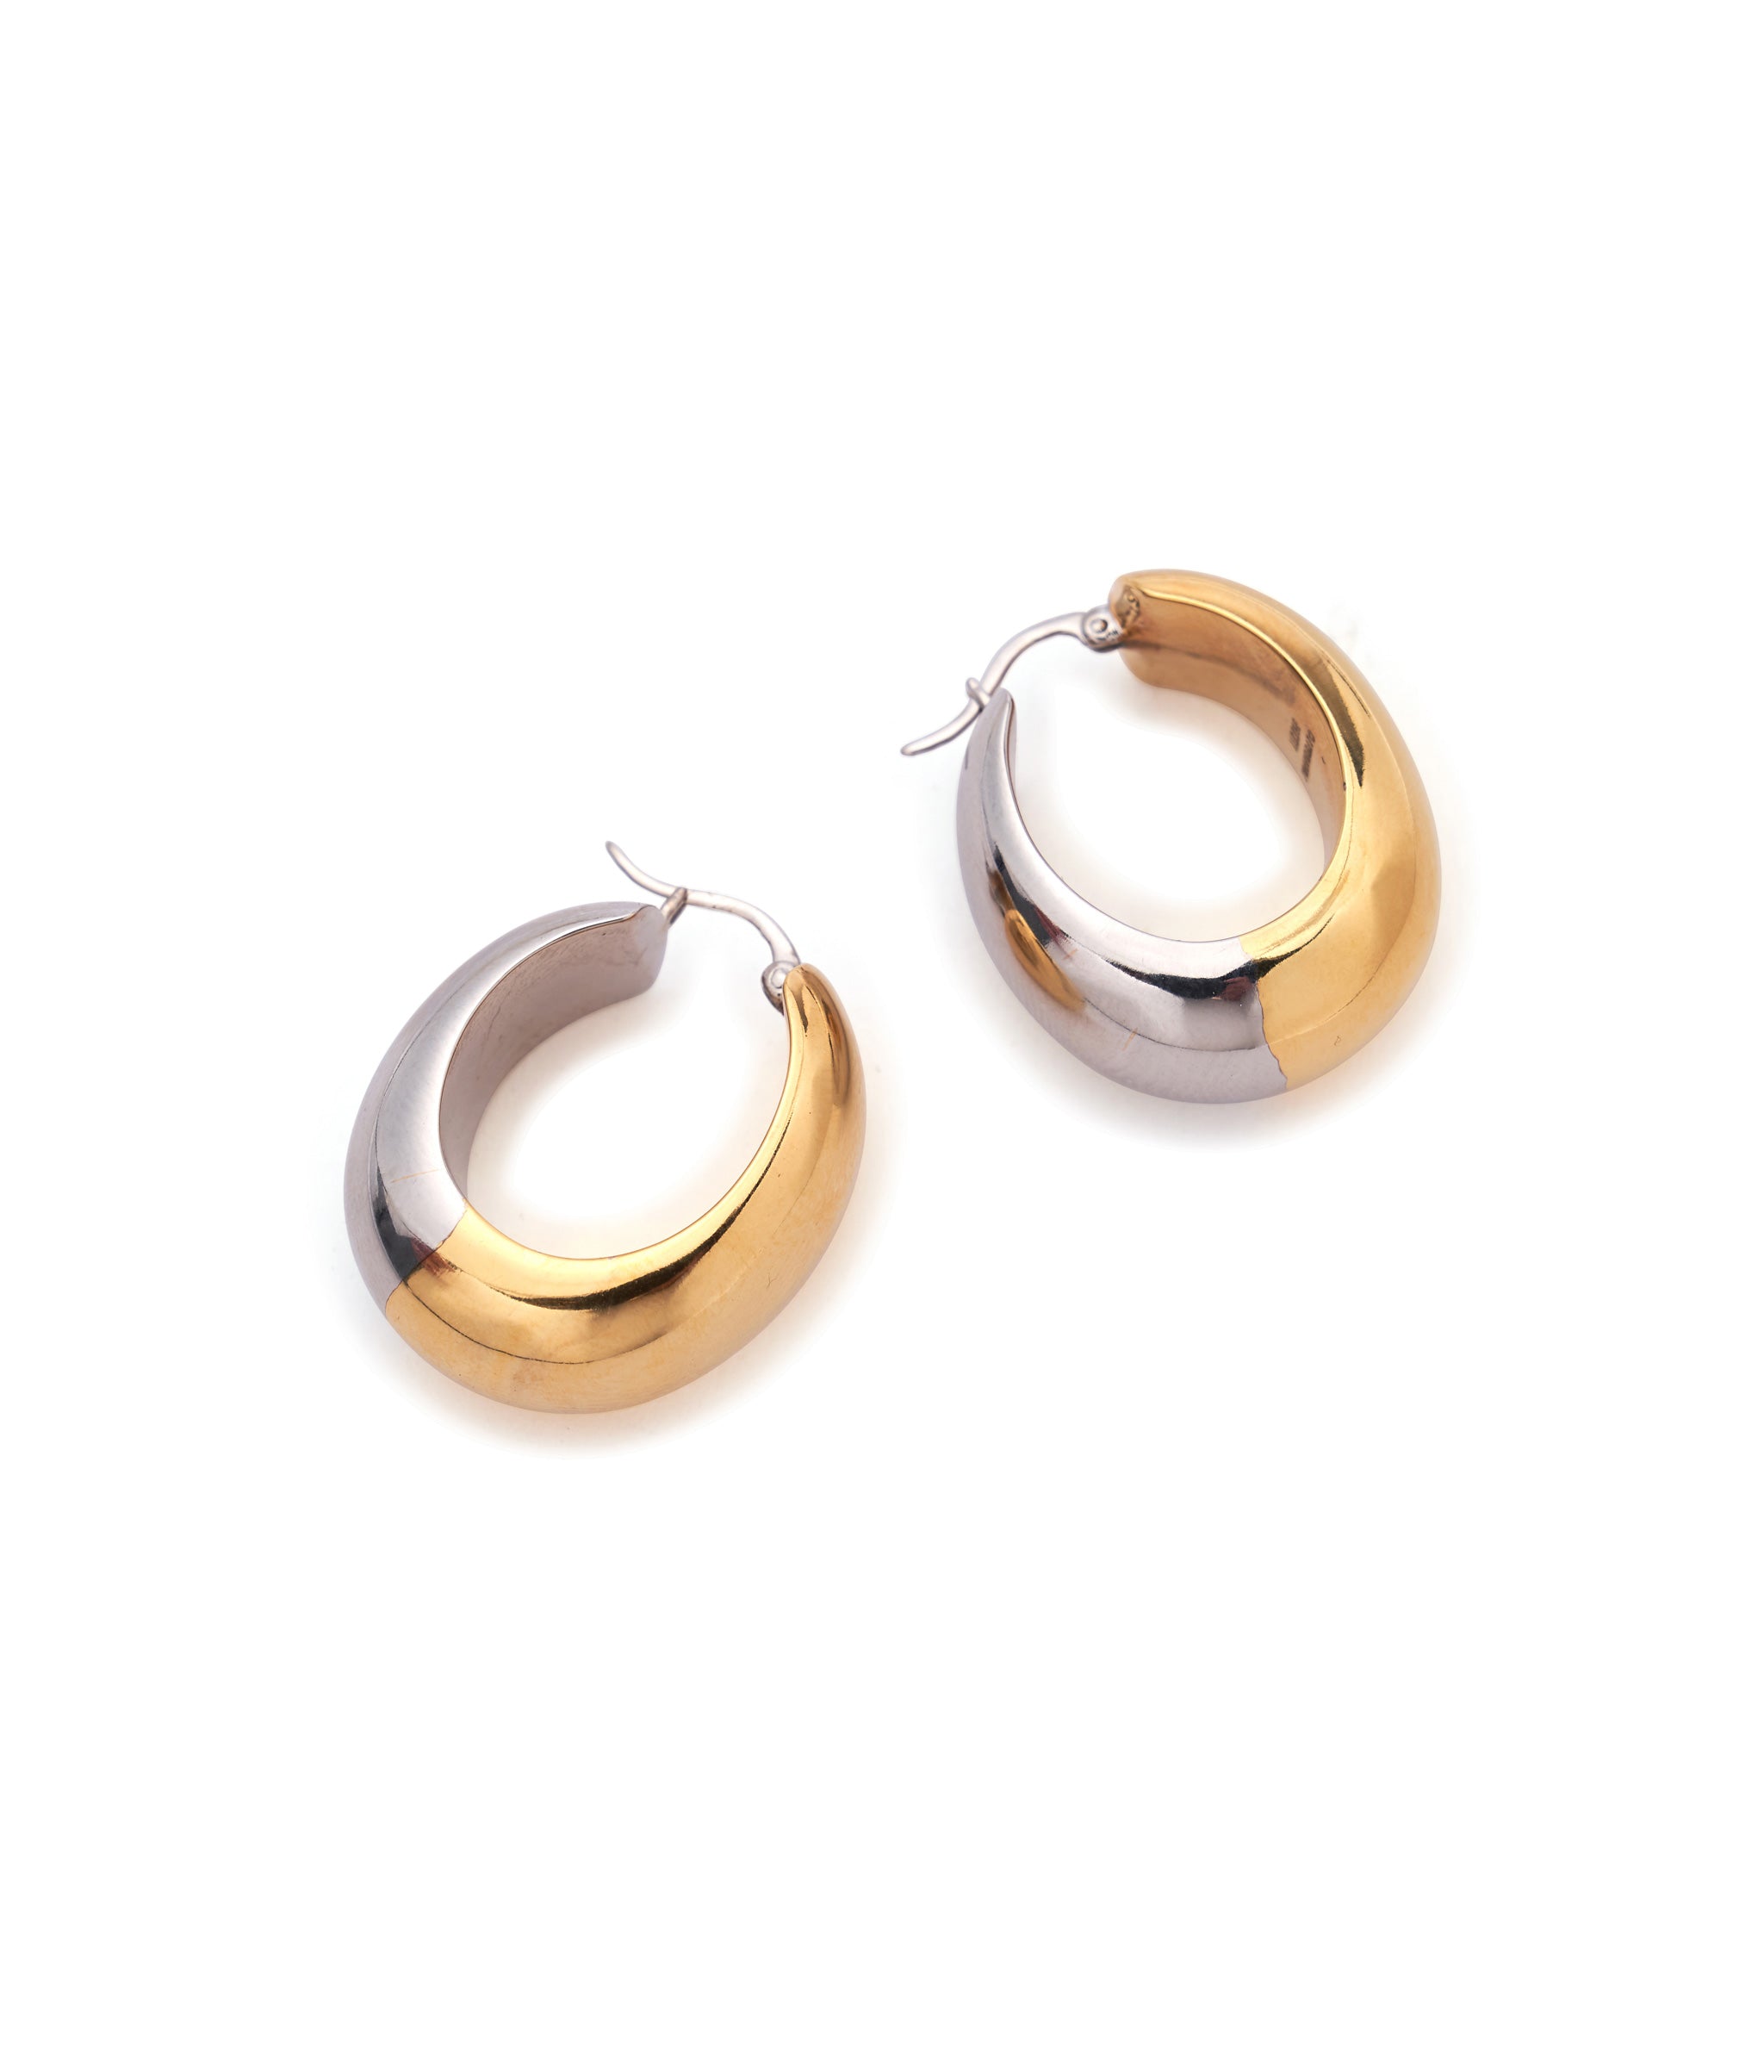 Bubble Hoops in Mixed Metal. Small, hollow puffy hoop earrings in half gold and half silver. Side view.